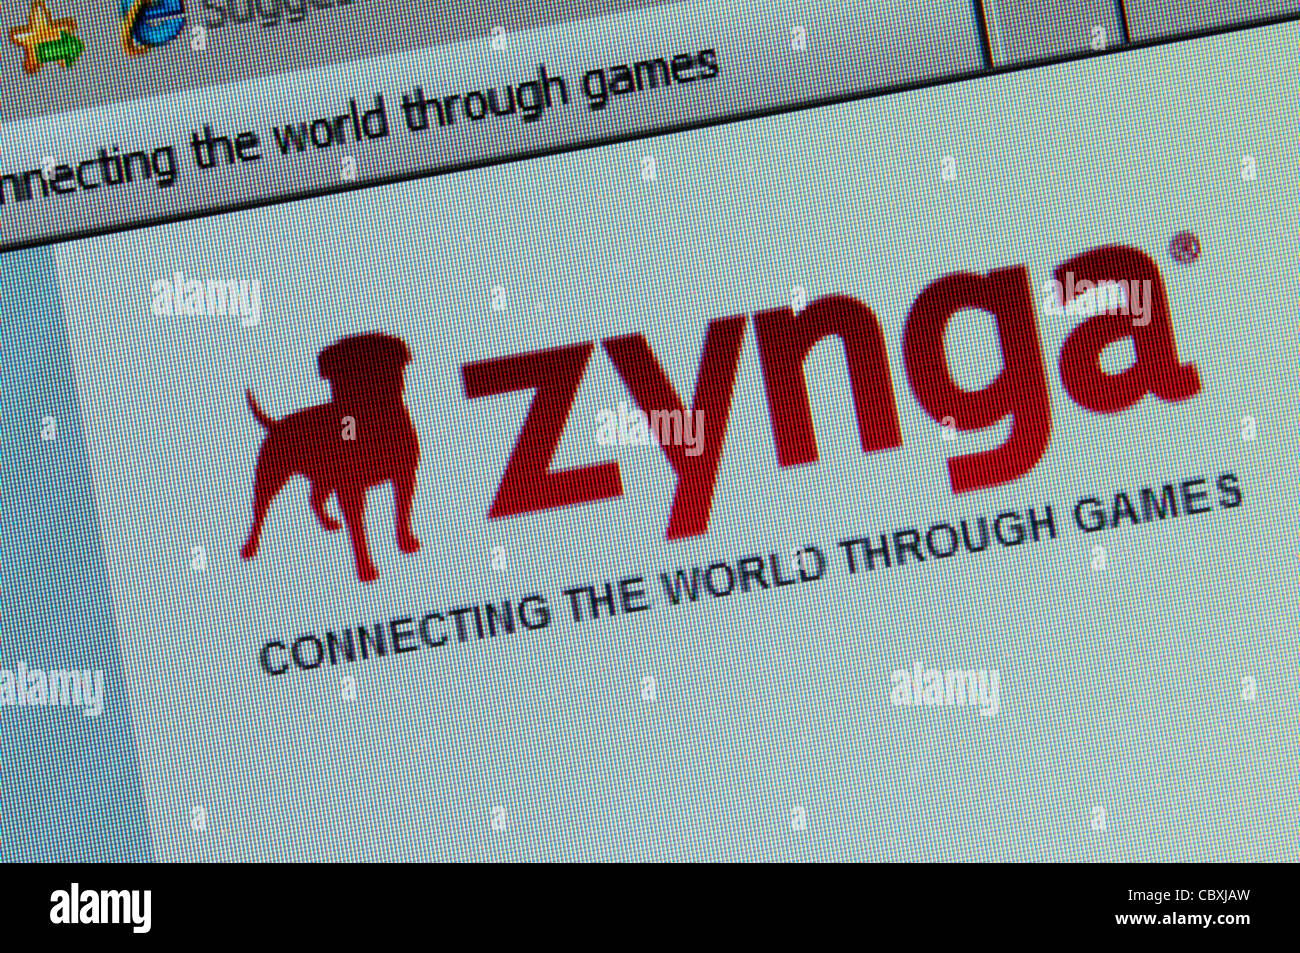 An enlarged portion of the Zynga social network gaming web site. Stock Photo